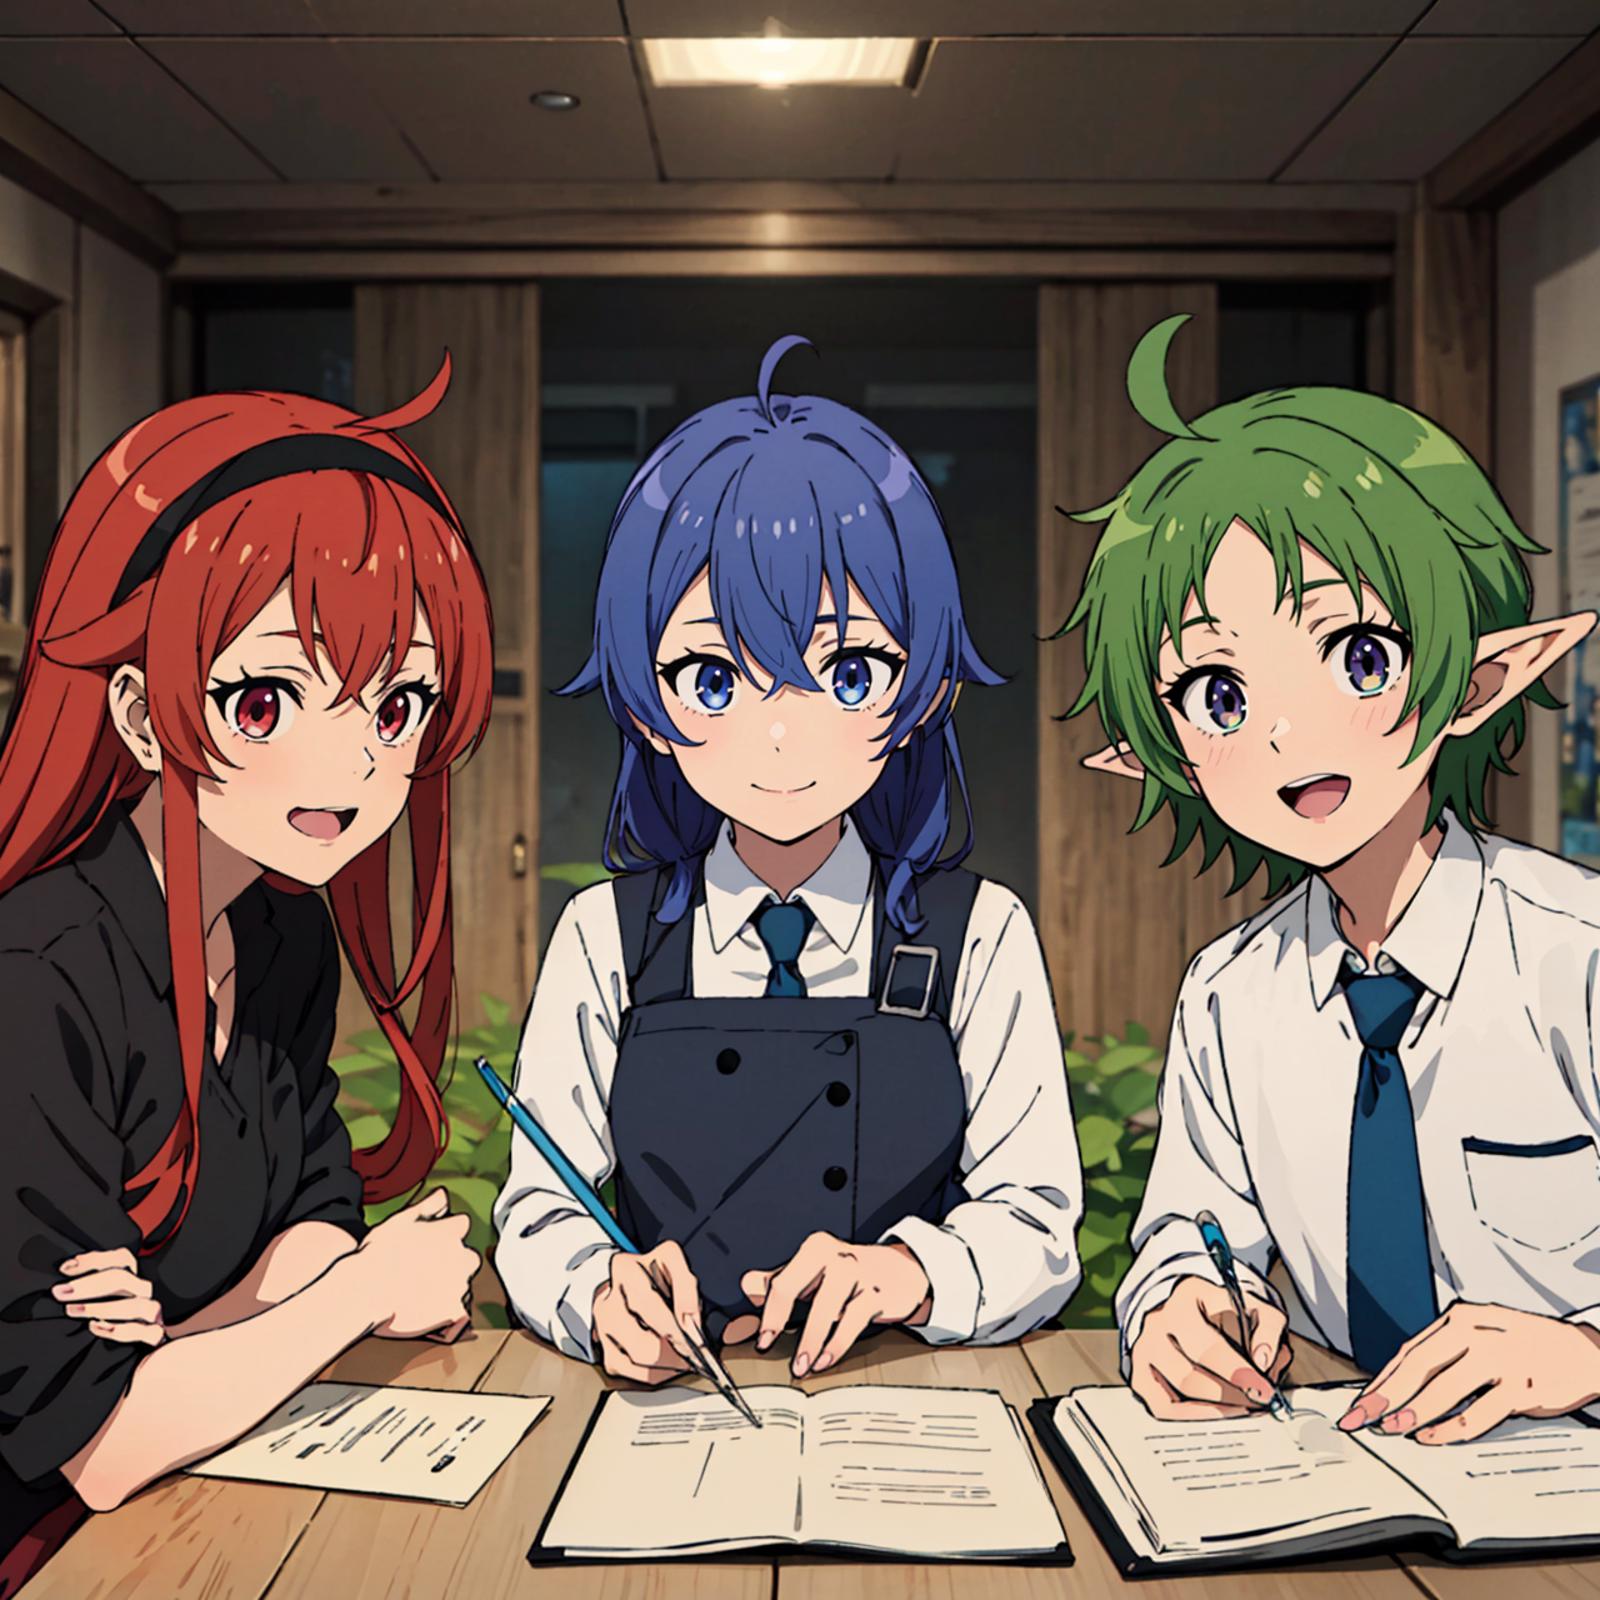 Three young girls in school uniforms, smiling and writing at a table.